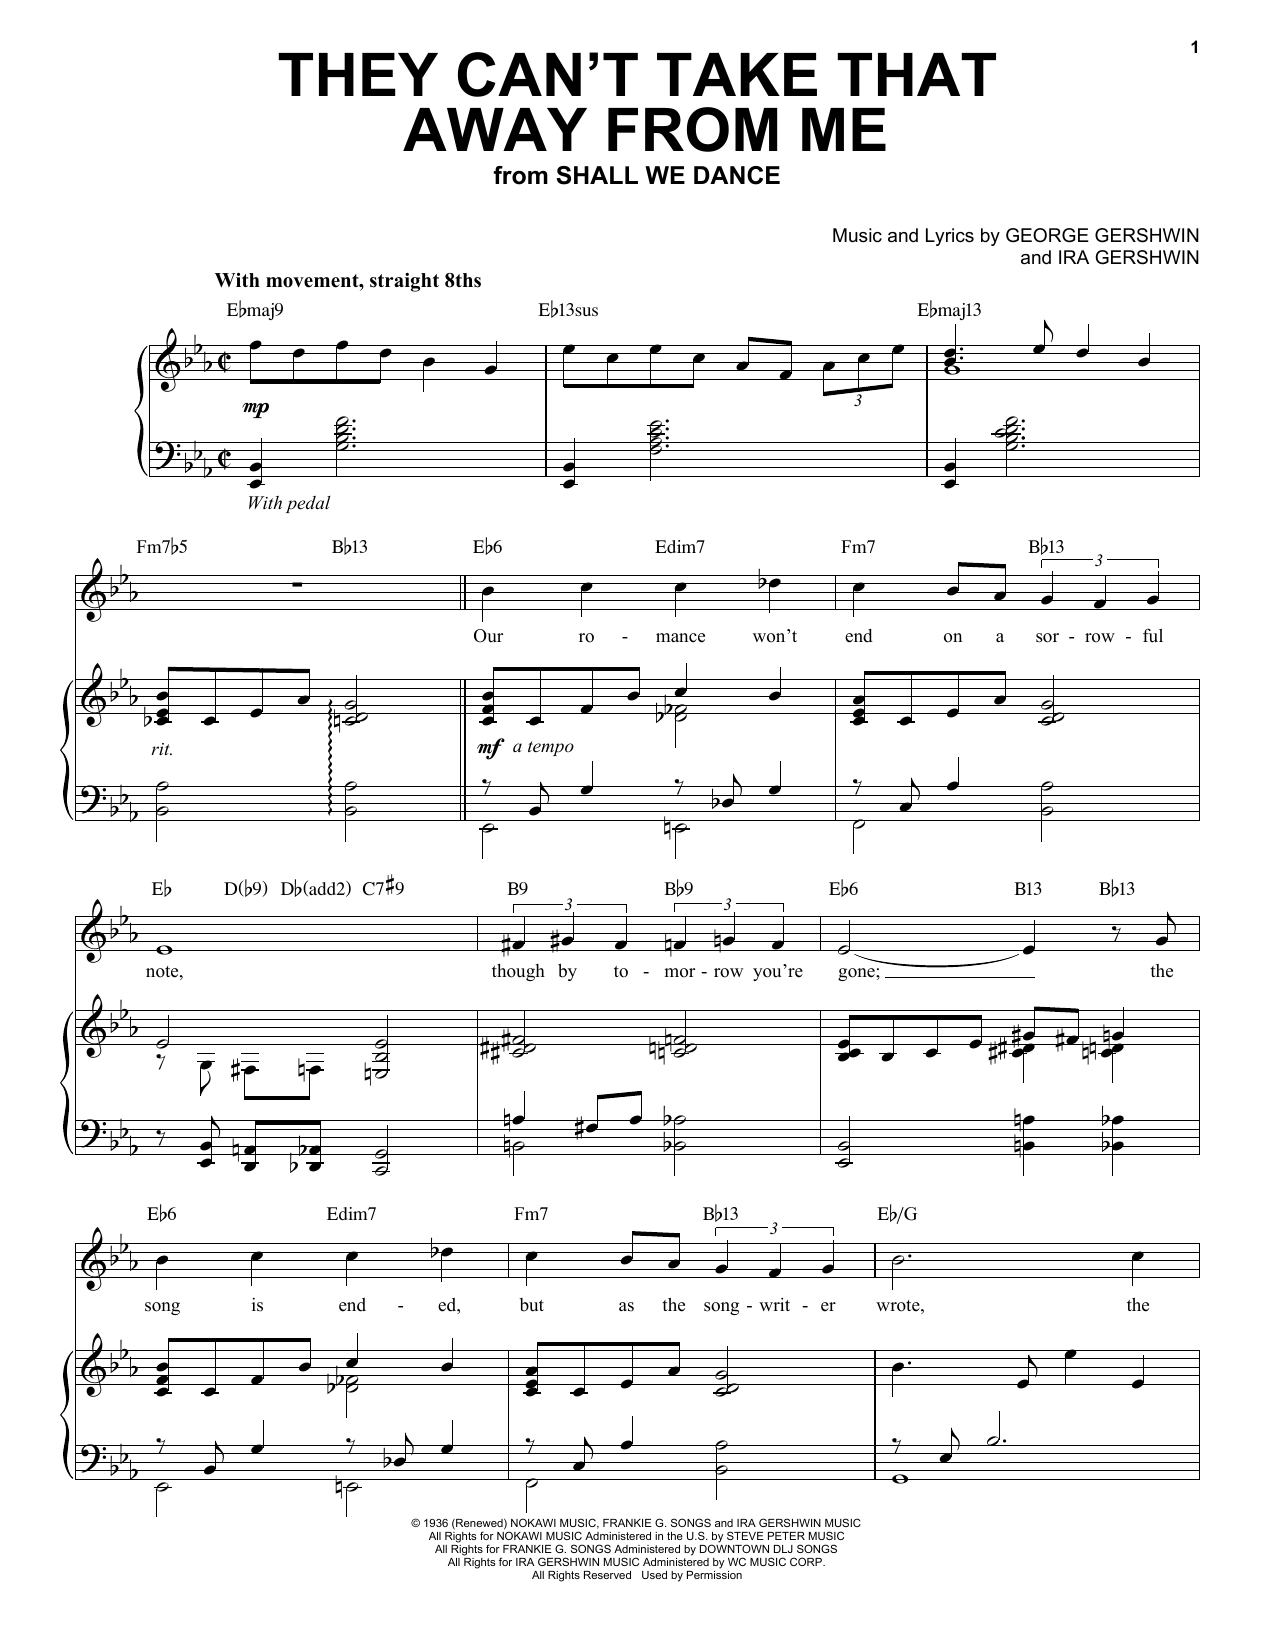 Download George Gershwin They Can't Take That Away From Me [Jazz Sheet Music